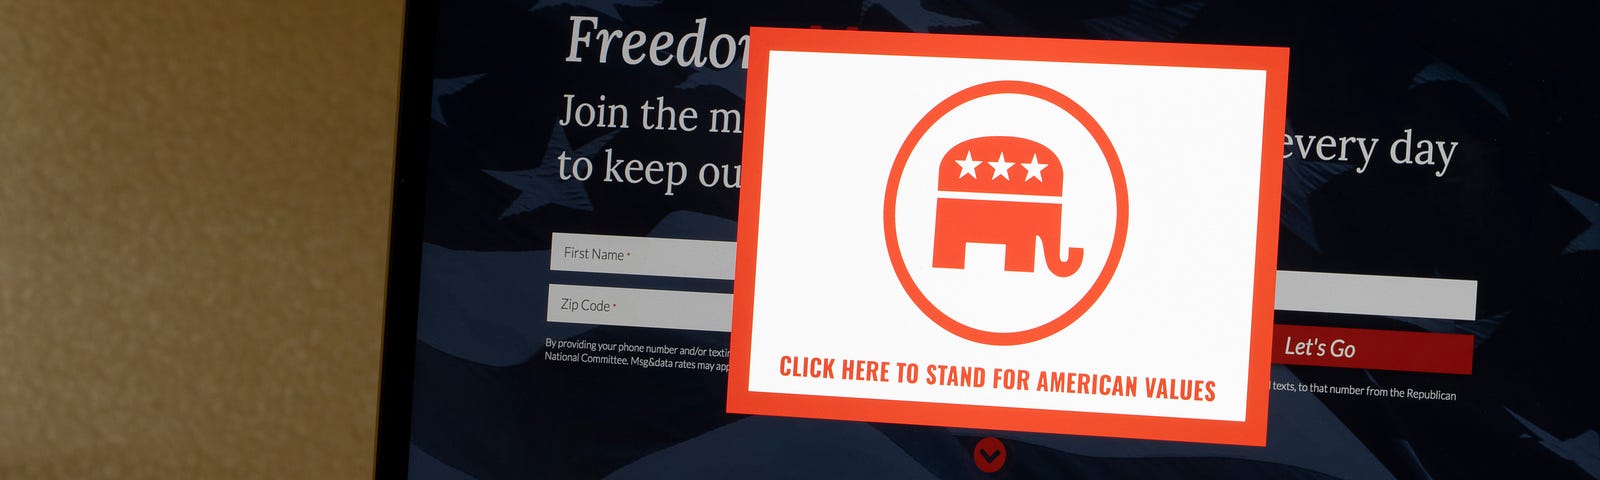 Red Republican elephant sticker reading “Click here to stand for American Values” on pasted on blackboard.